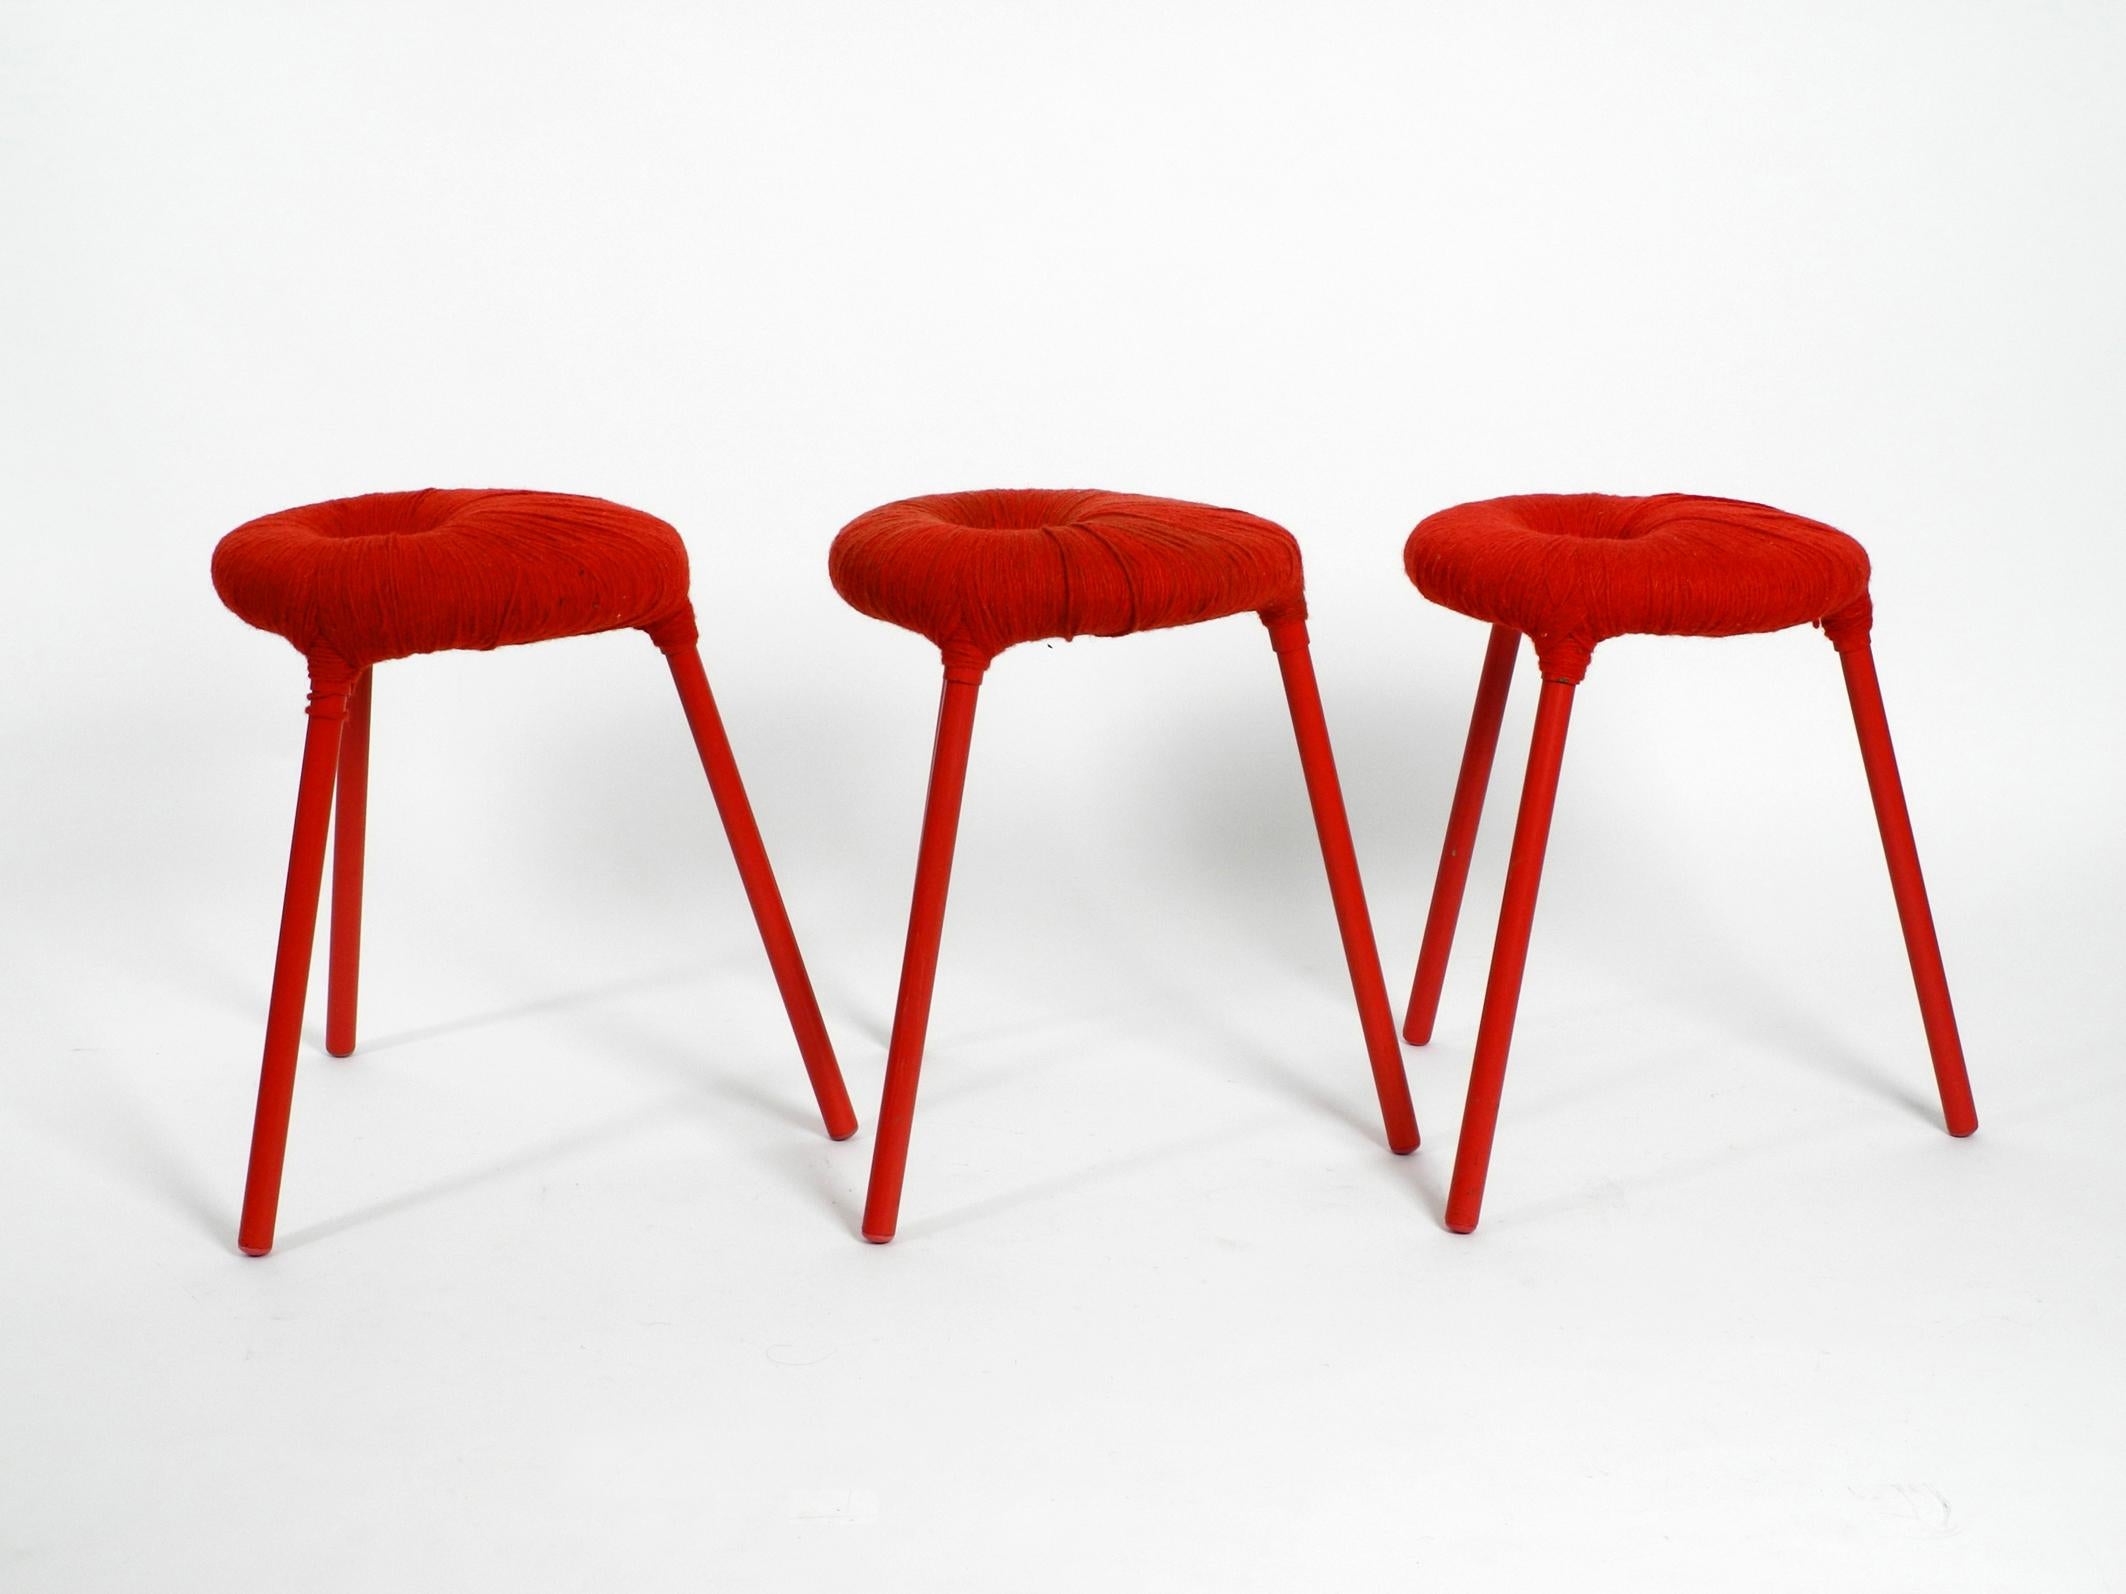 Three very rare three-legged stools model Eskilstuna. 
From the Ikea PS series from 1999.
Design by Findlay, Graeme, McElroy and Carmen. 
Wanted classics, were built only briefly.
Tubular steel legs, metal frame wrapped in red wool.
All three